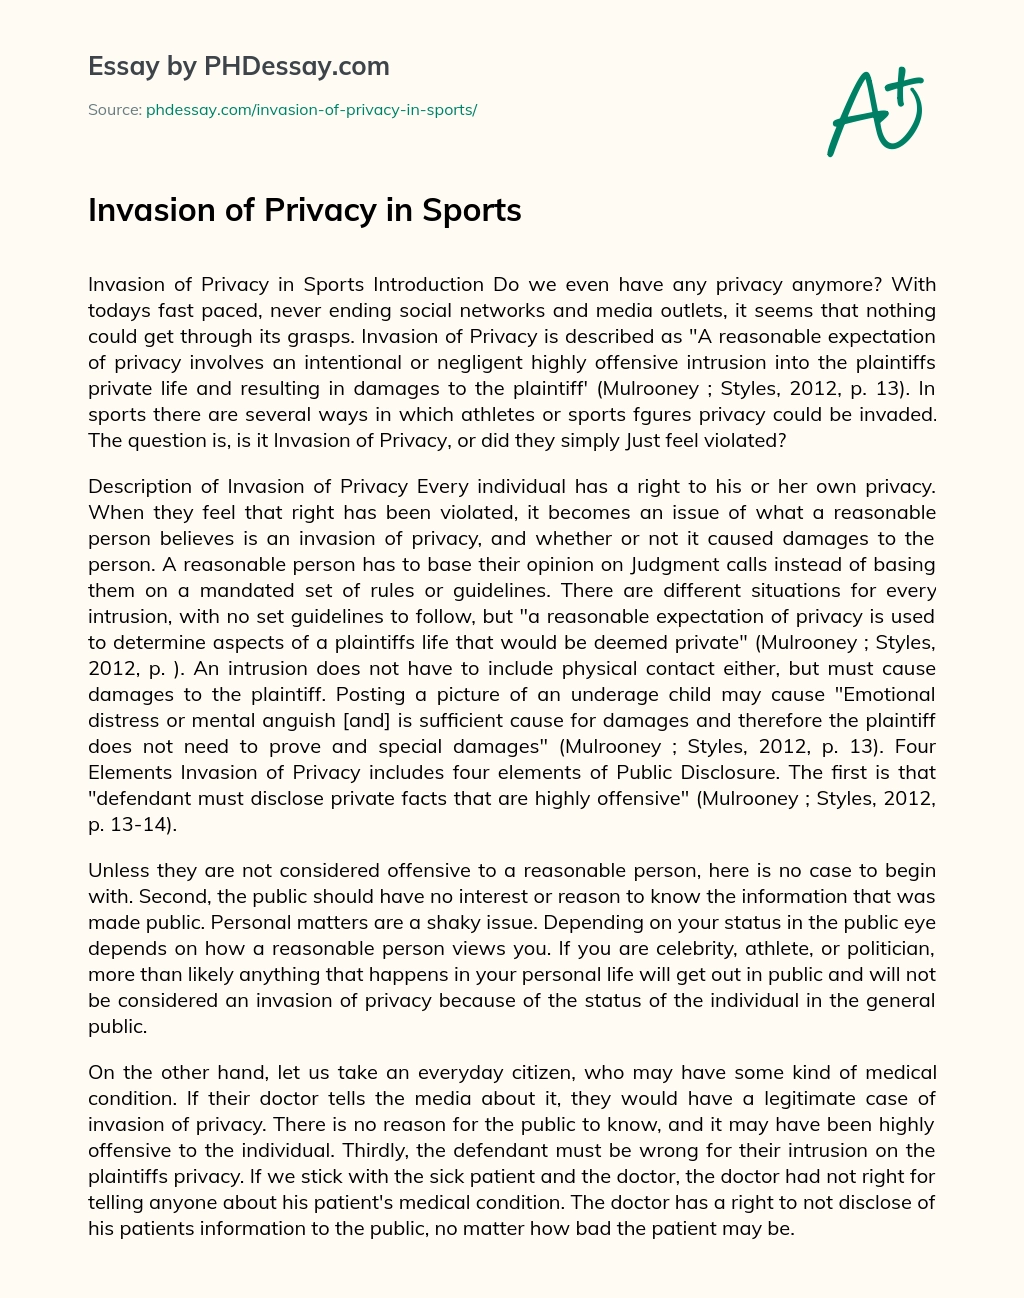 Invasion of Privacy in Sports essay